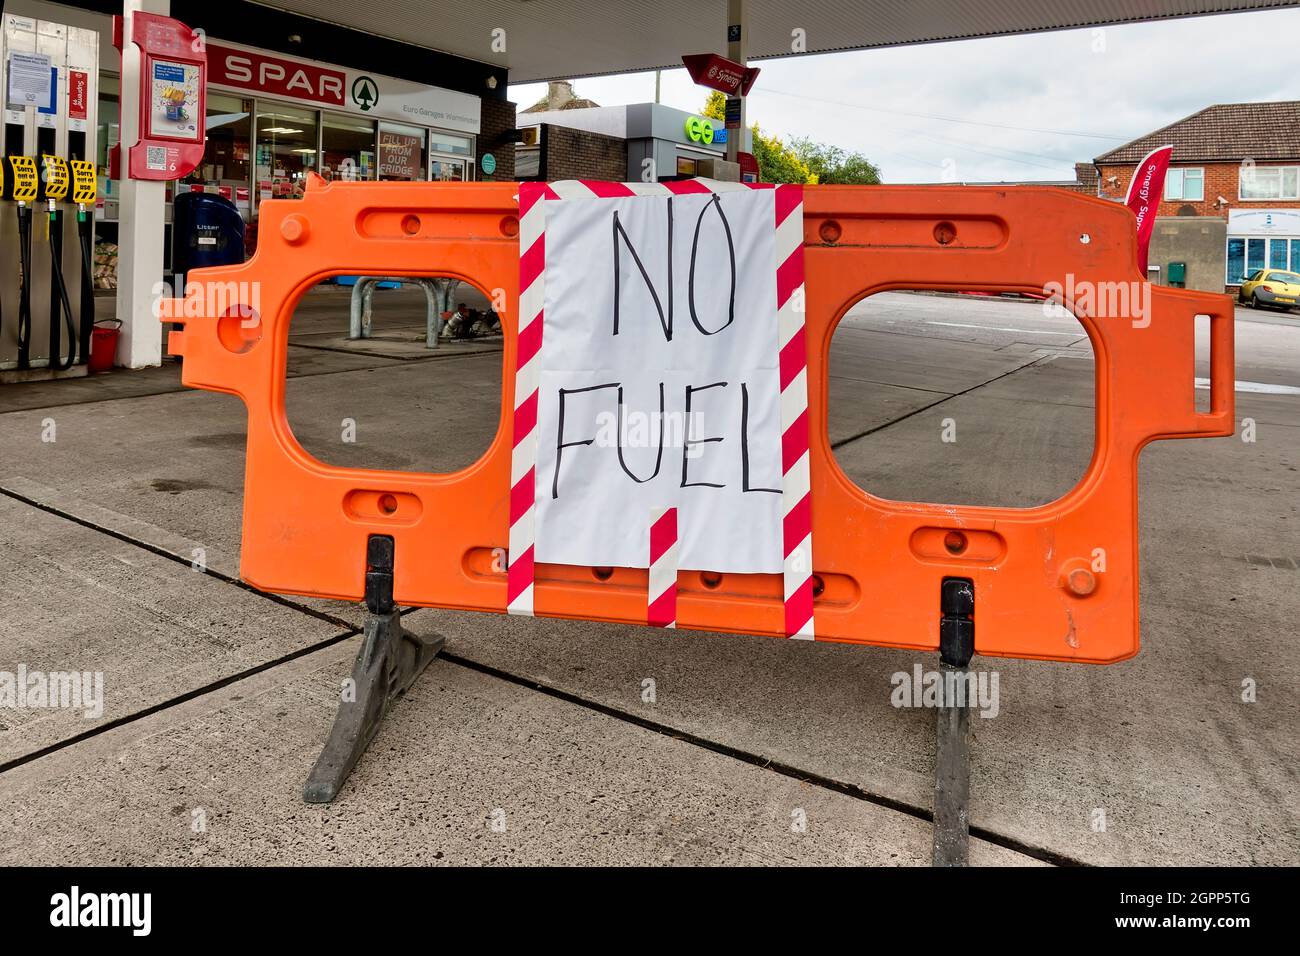 Warminster, Wiltshire, UK - 28 September 2021: A No Fuel sign on the forecourt of an ESSO Petrol Station in East Street, Warminster, Wiltshire, UK Stock Photo